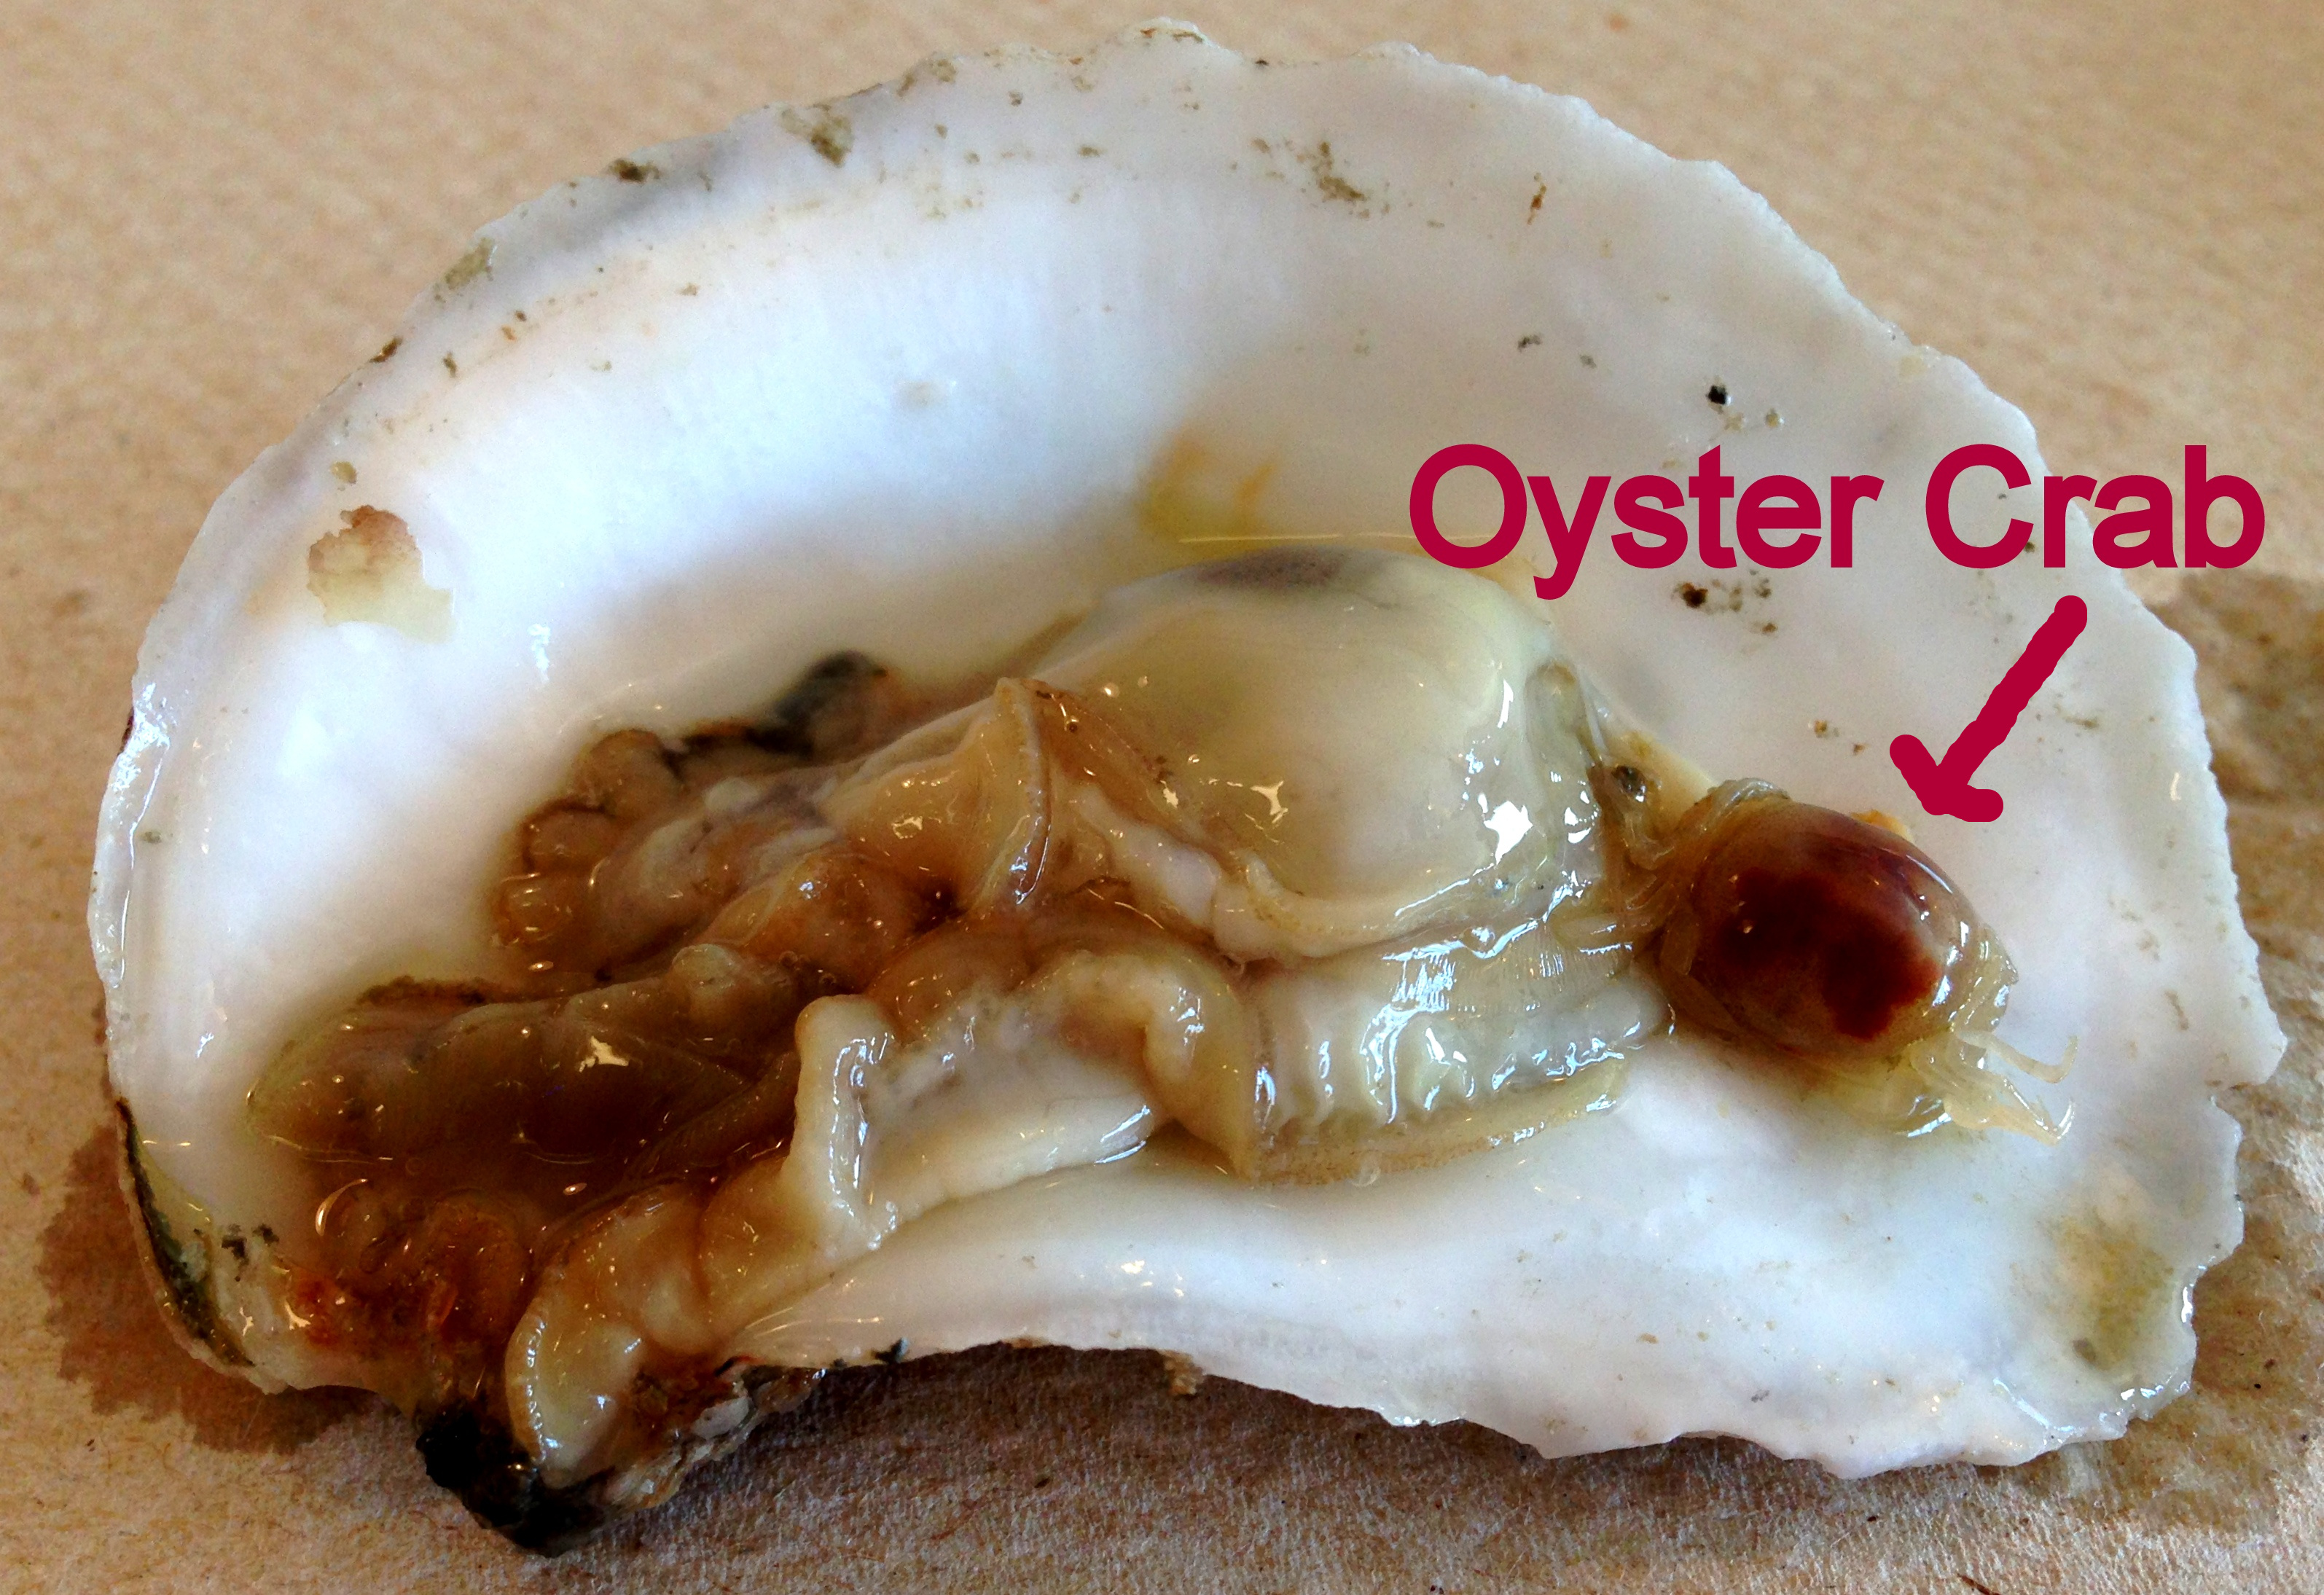 A live oyster crab inside a raw oyster's shell.